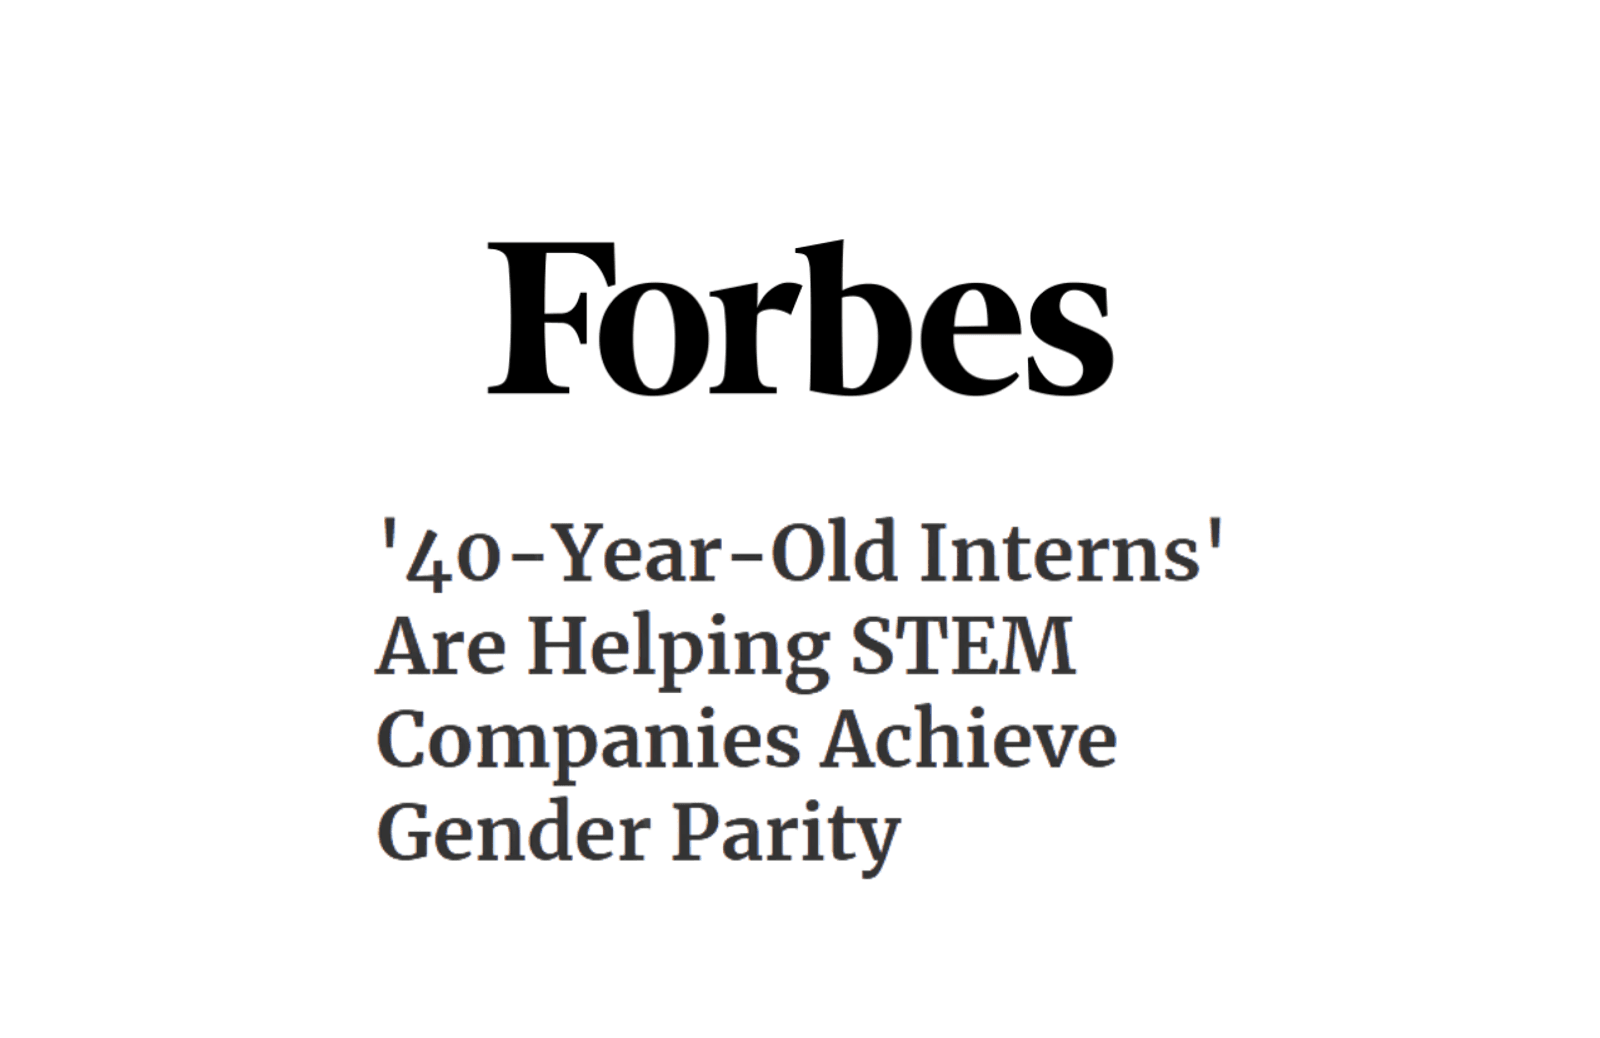 Forbes 40 Year Old Interns Helping Stem Companies Gender Parity news thumbnail